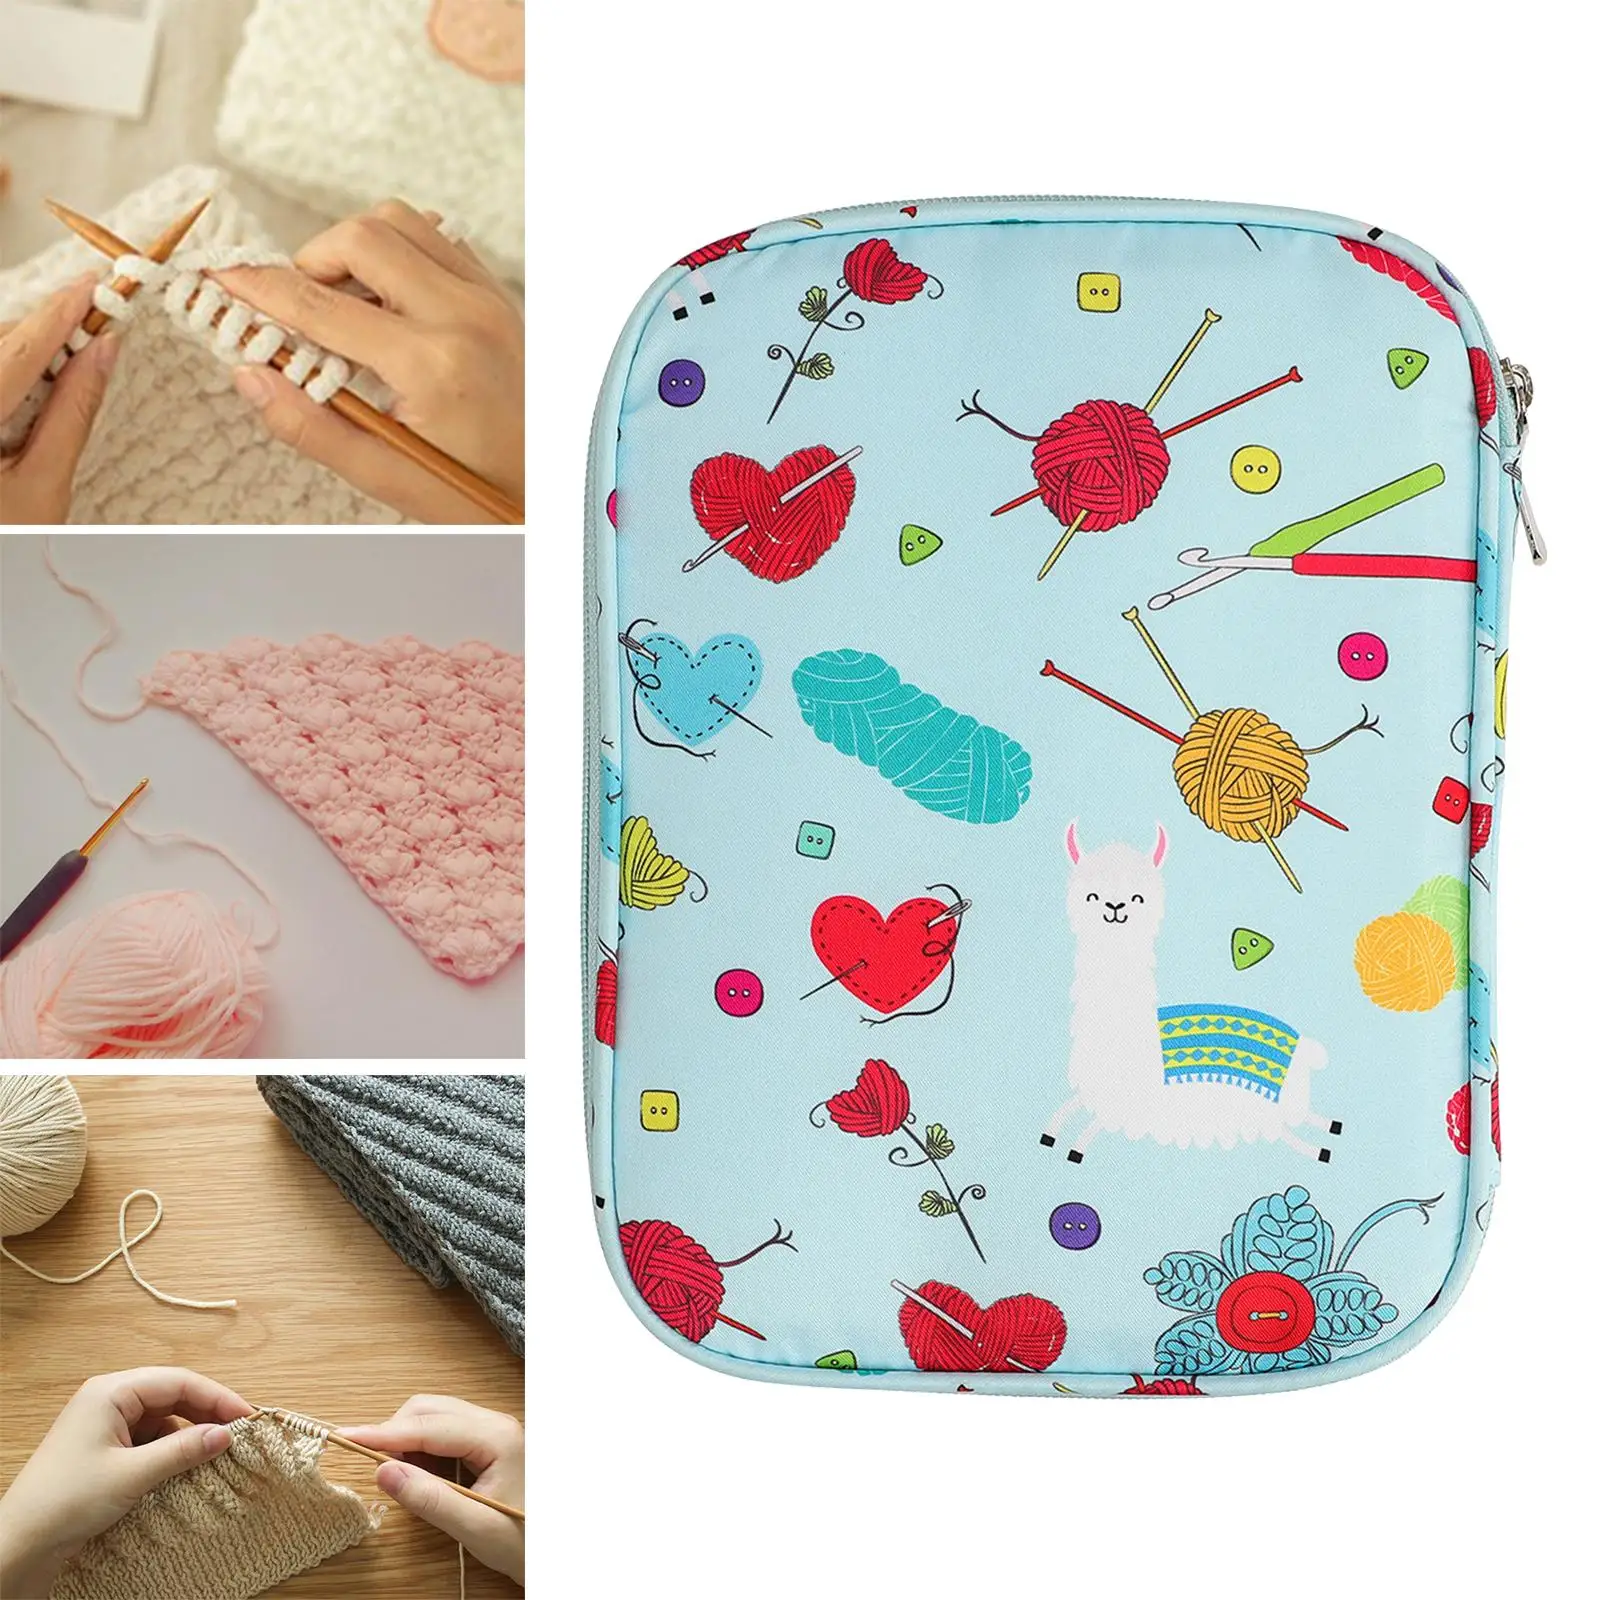 Portable Crochet Hook Case Storage Bag Versatile Double Layer Interior Compartment with Holder Slots for Everywhere Knitting